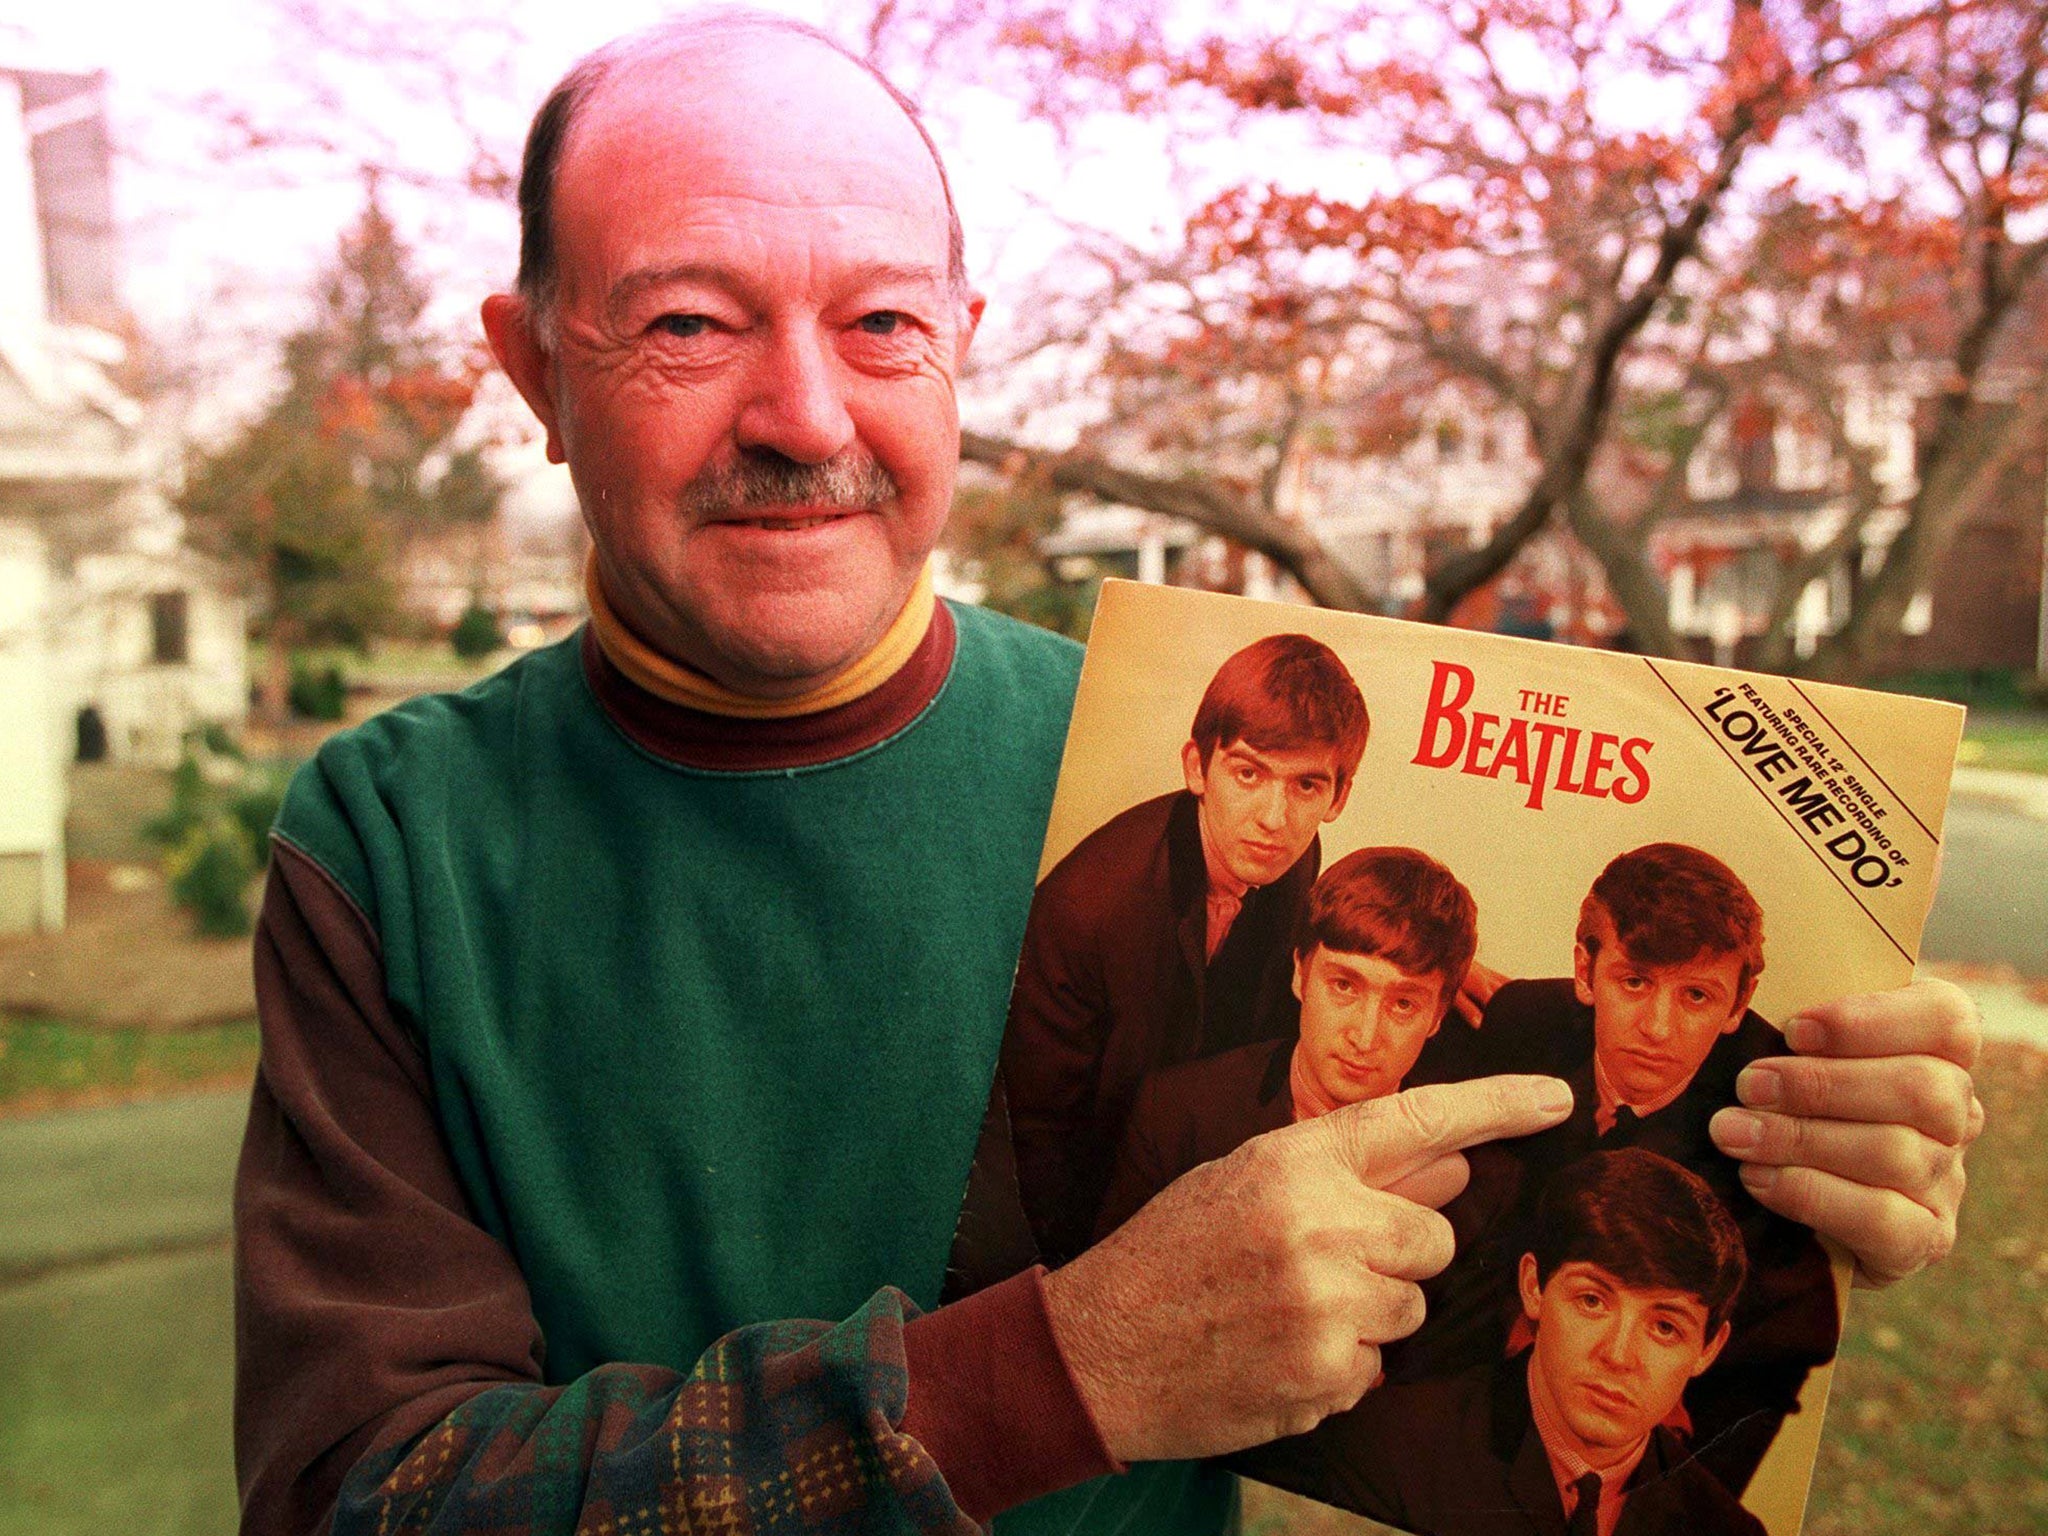 White recorded 'Love Me Do' with the Beatles